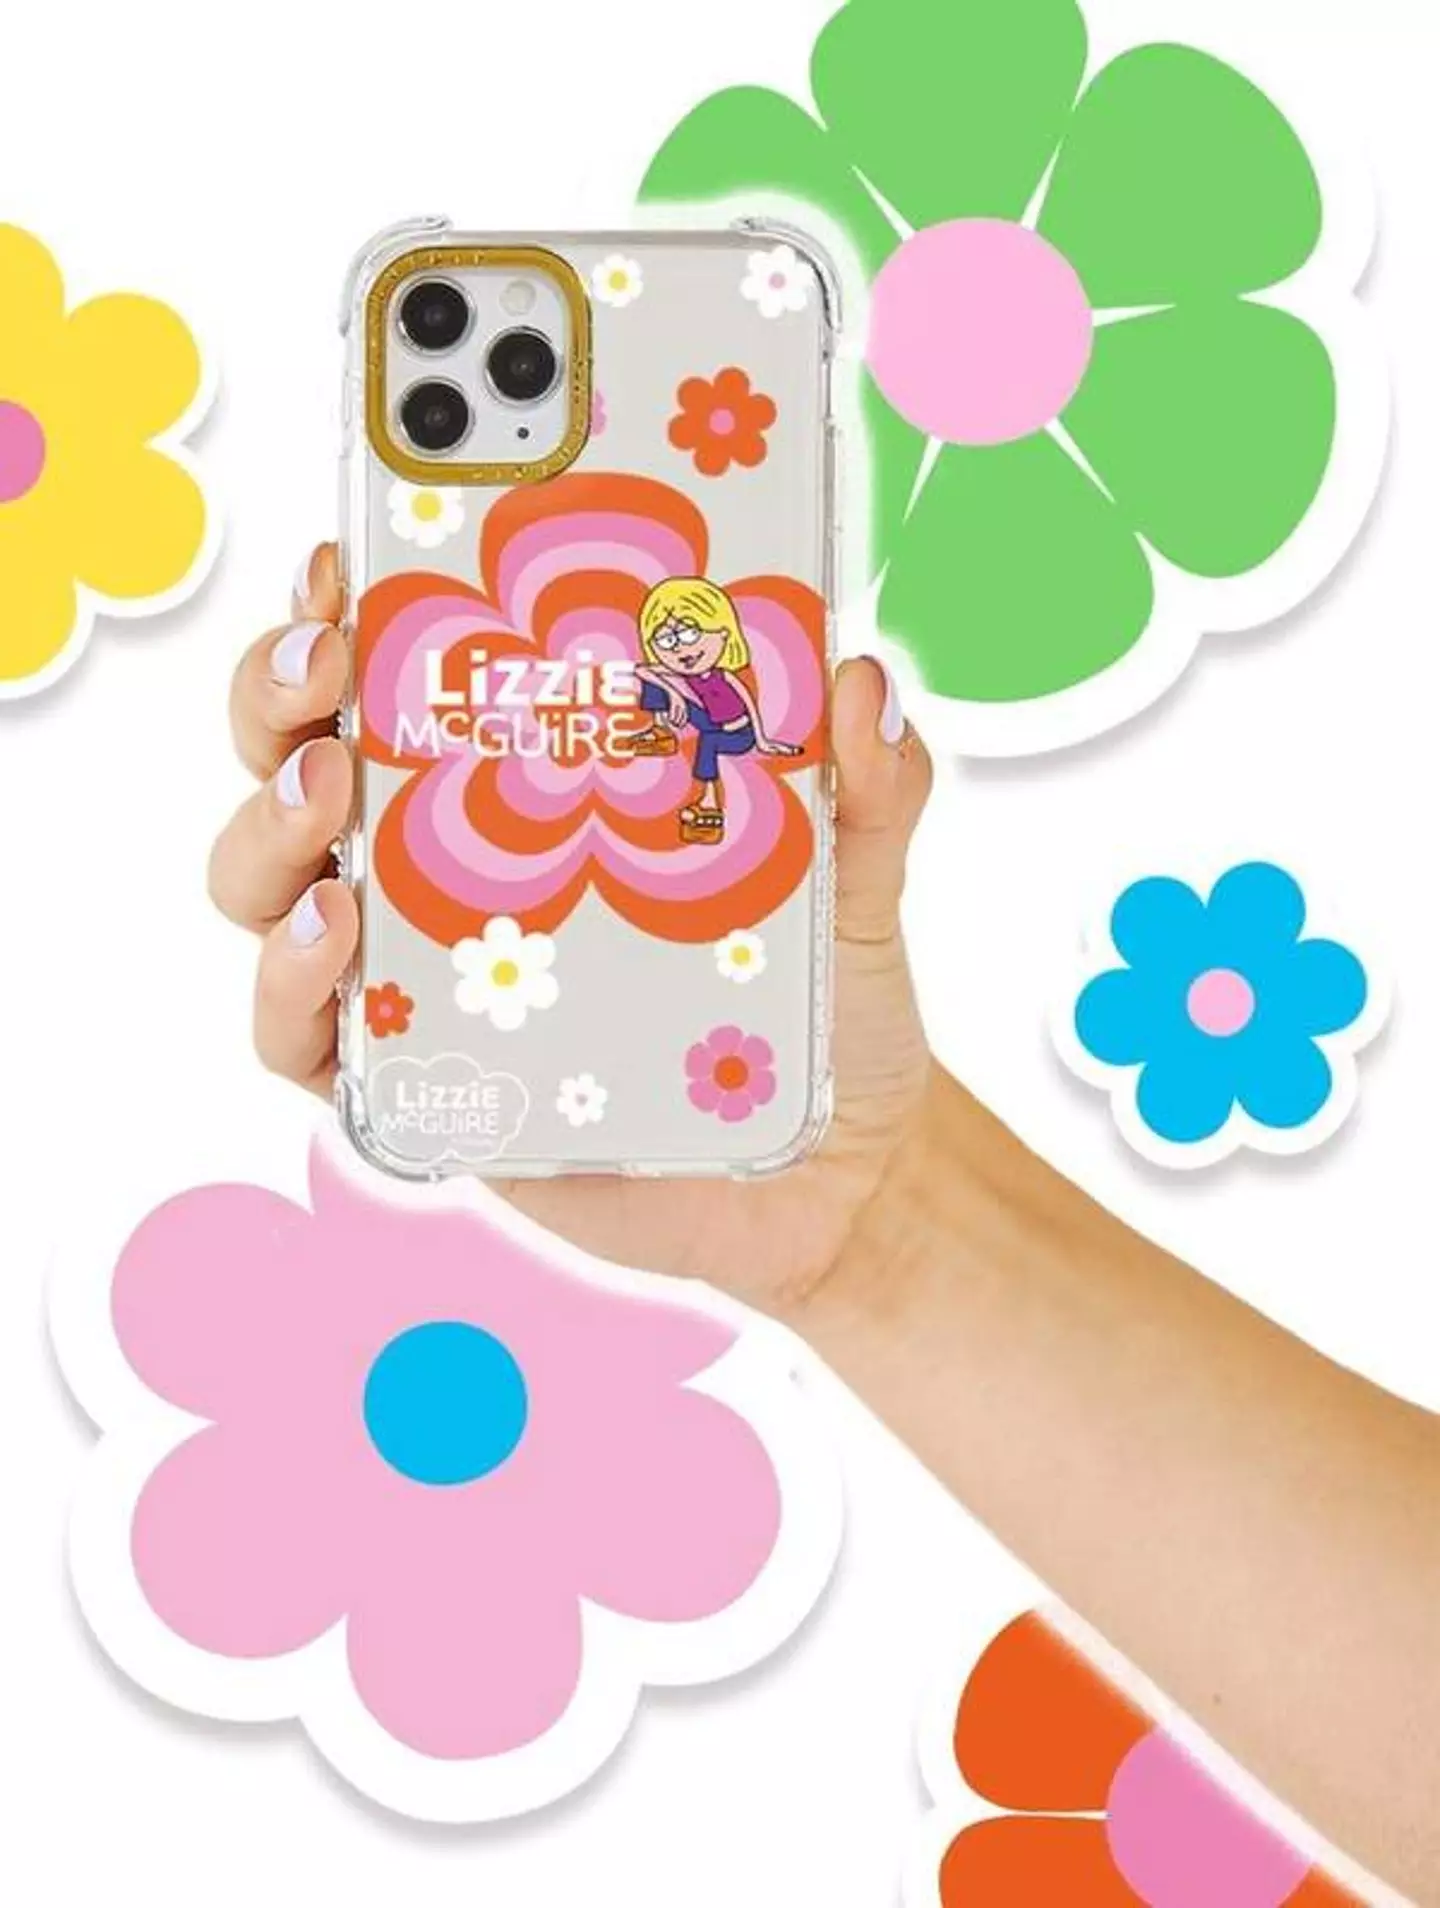 Need a new phone case? Lizzie's got you sorted (